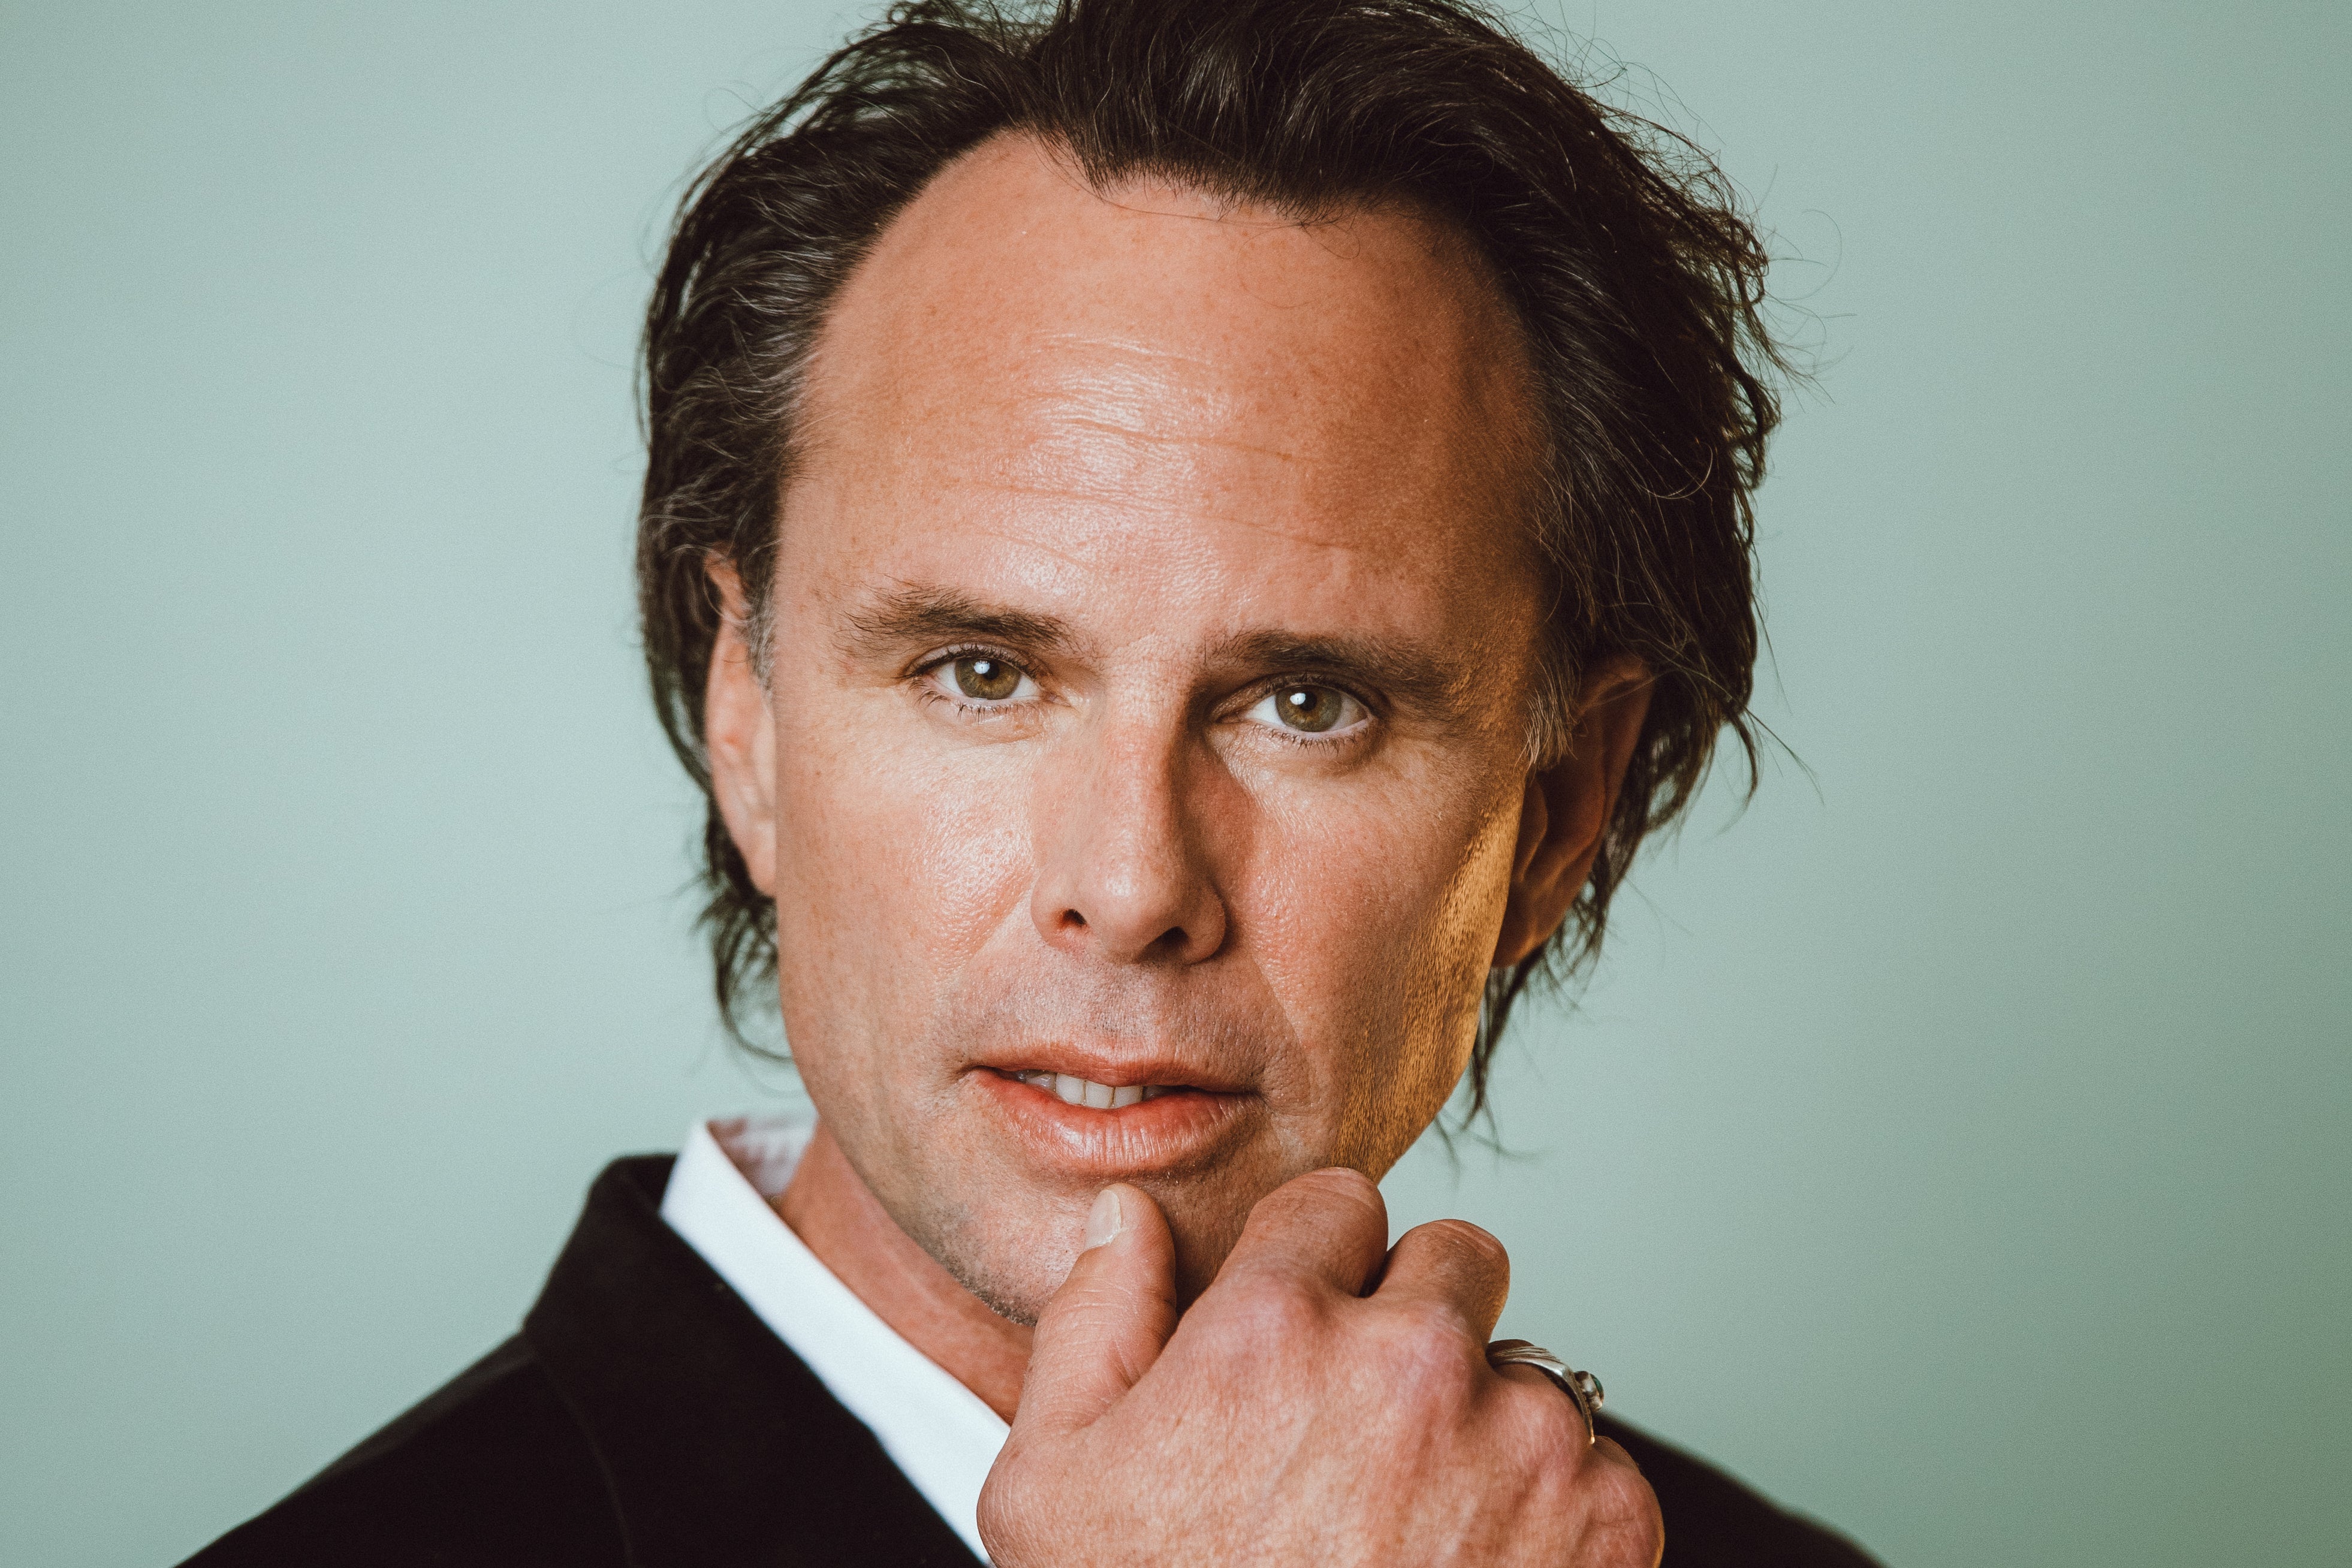 Walton Goggins: ‘When I first started acting, I was deeply insecure. I didn’t enjoy it'